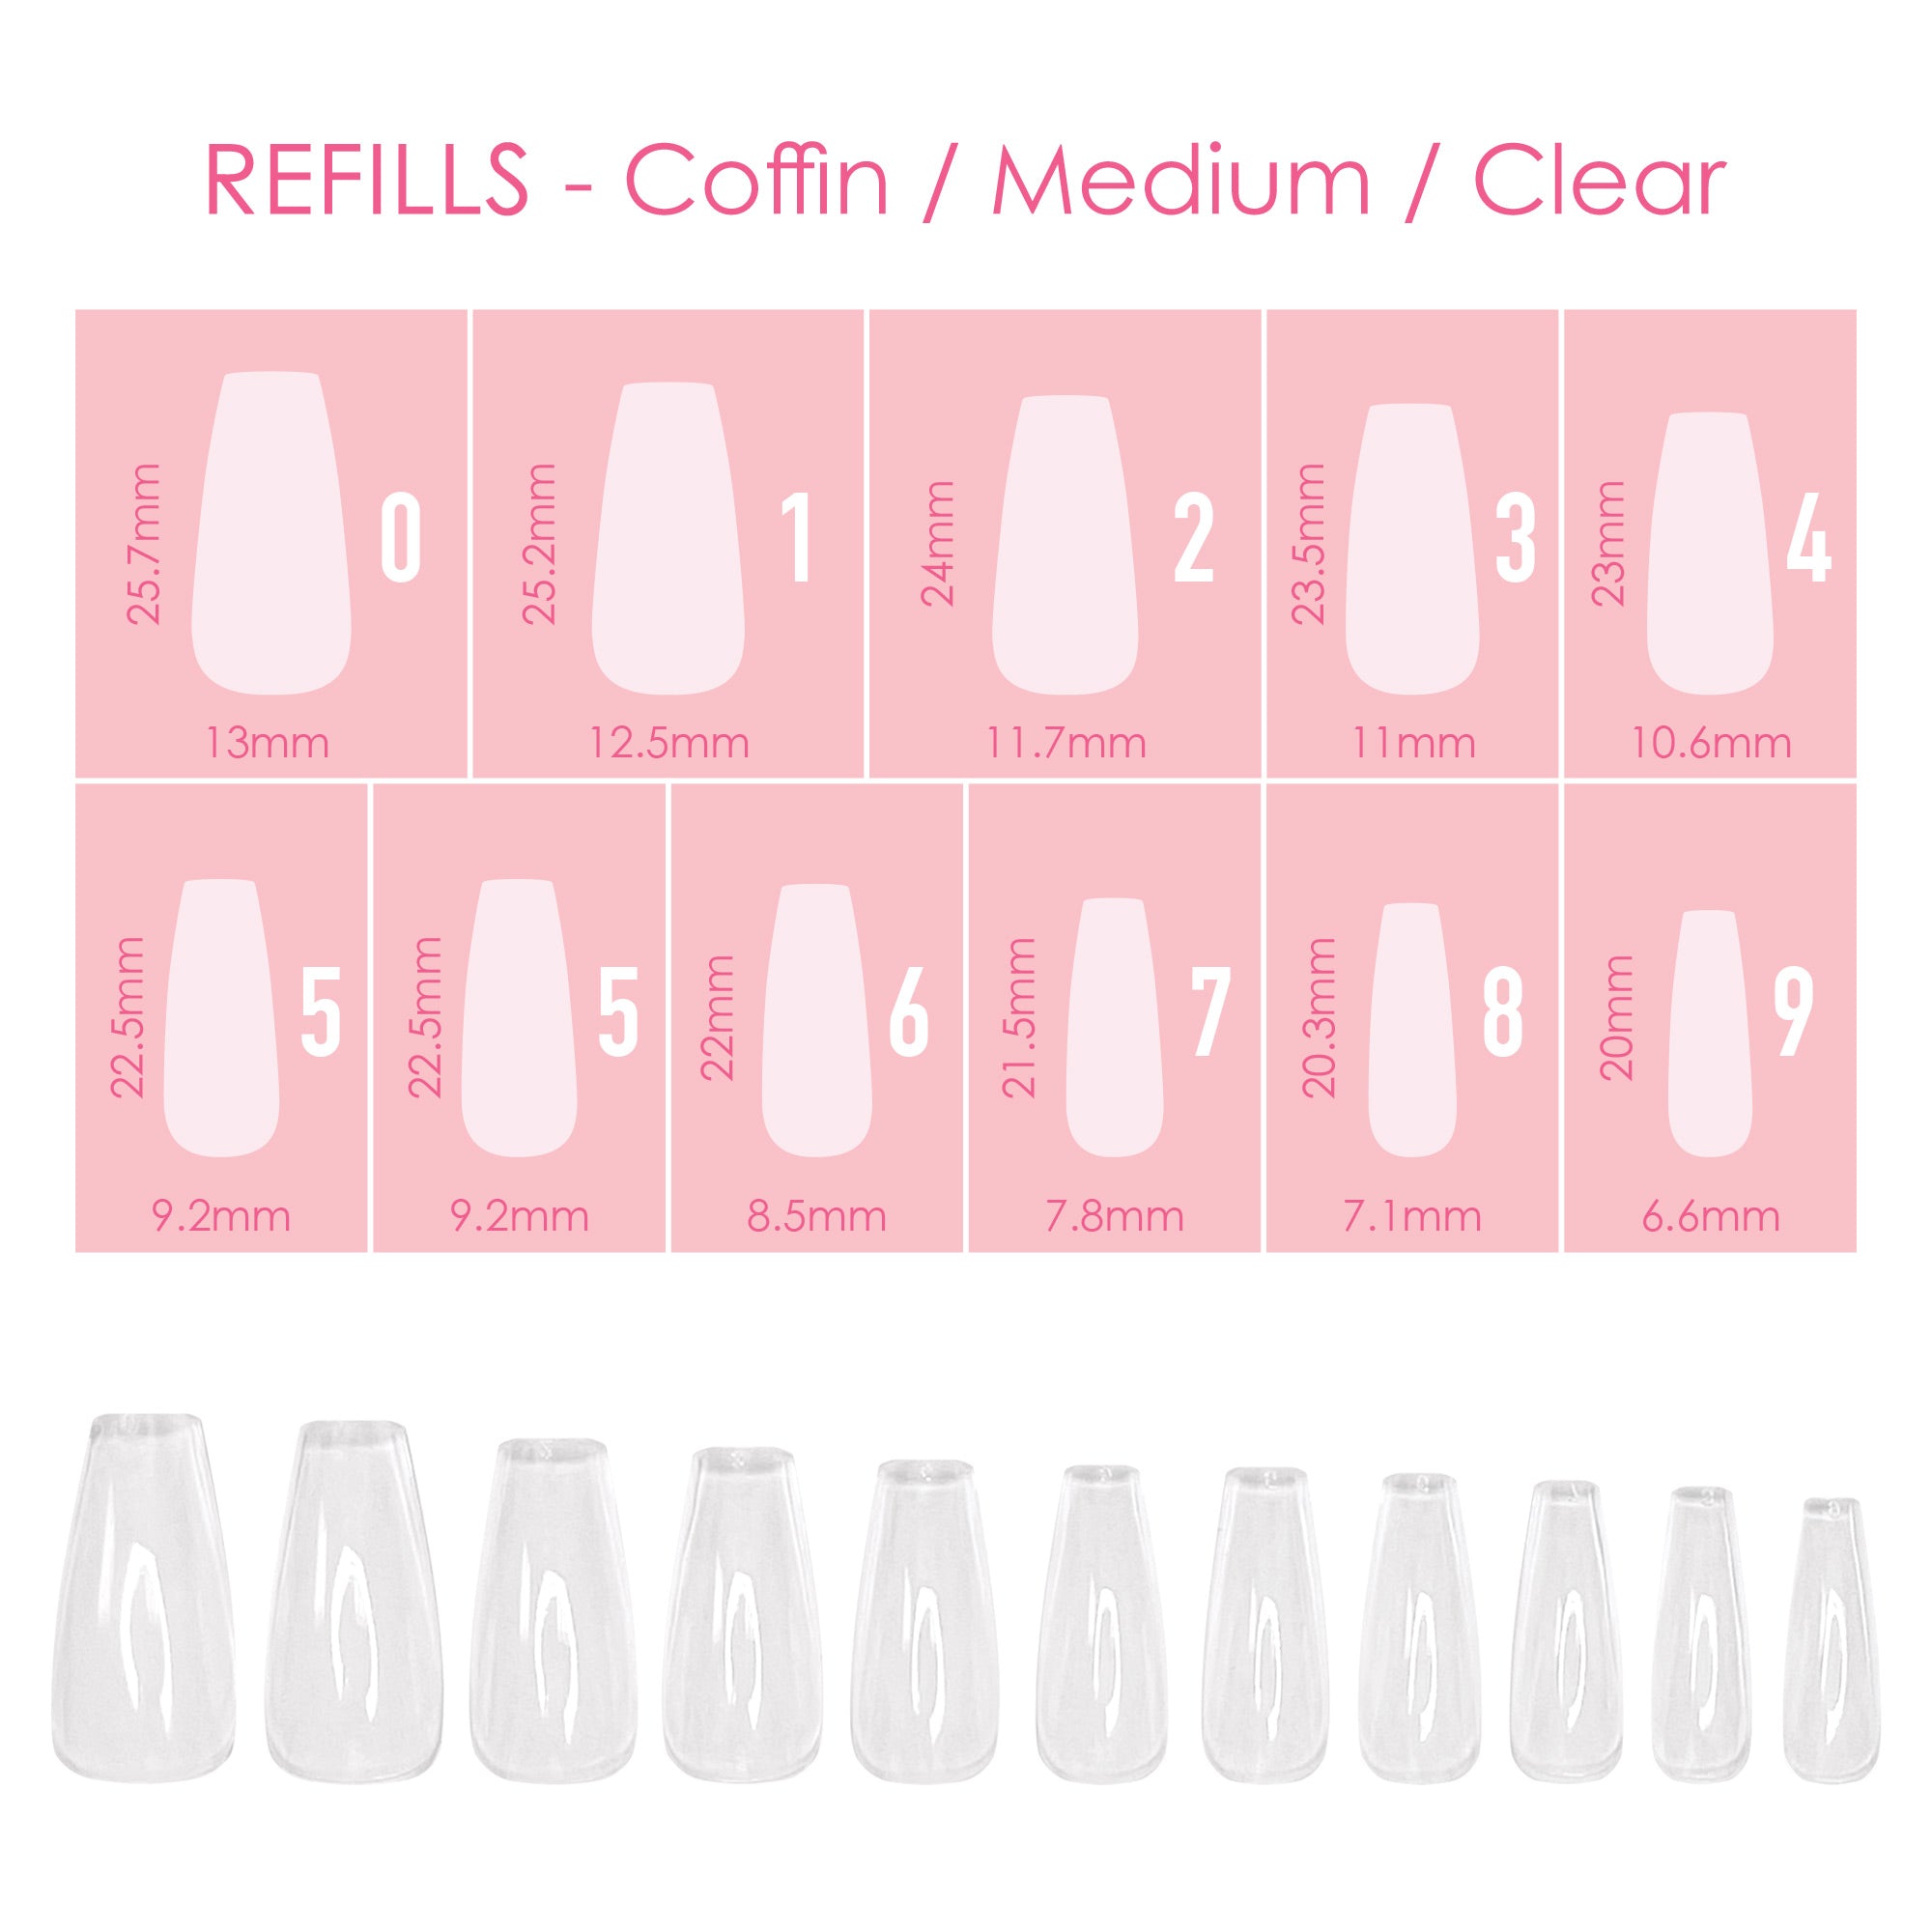 Charme Gel Extension Tips Refill / Coffin / Medium / Clear